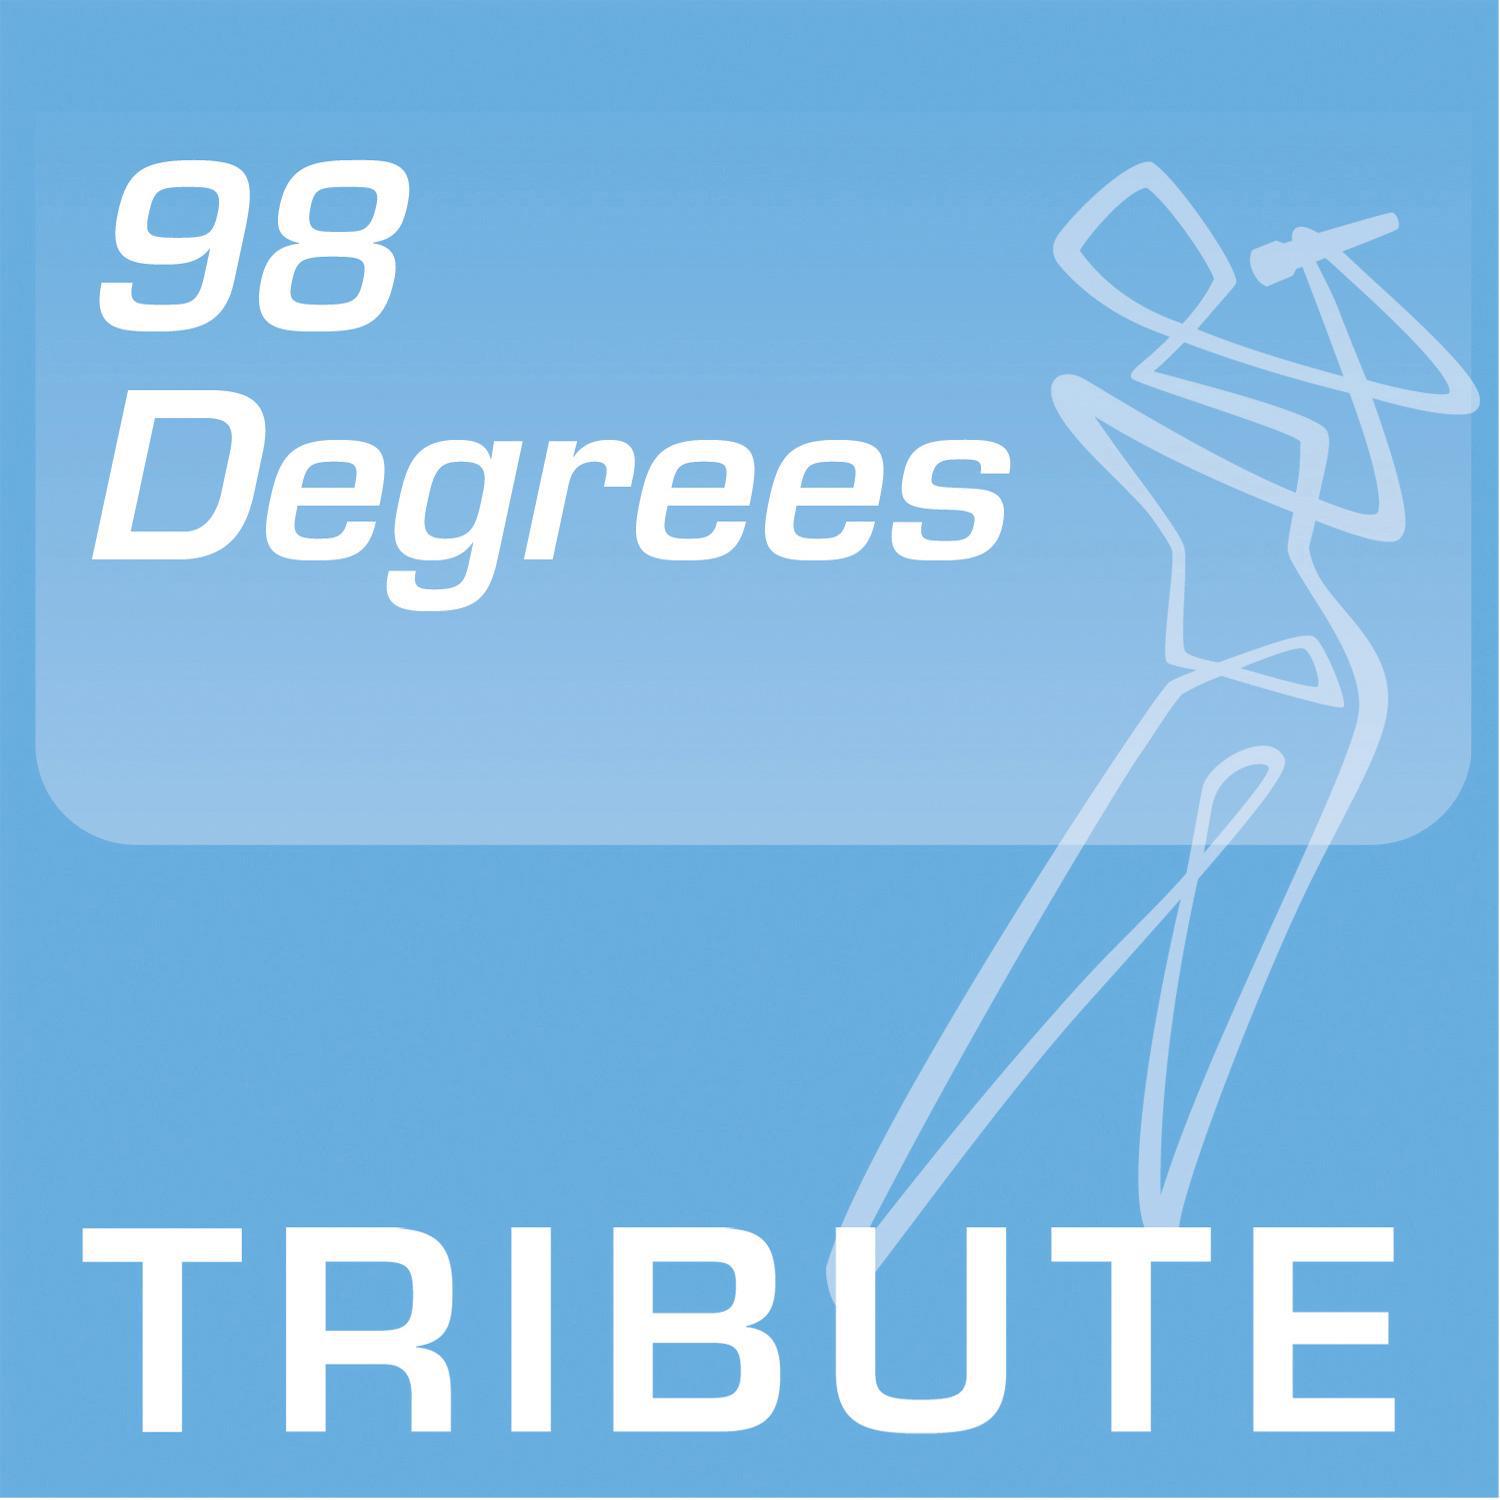 Tribute To: 98 Degrees